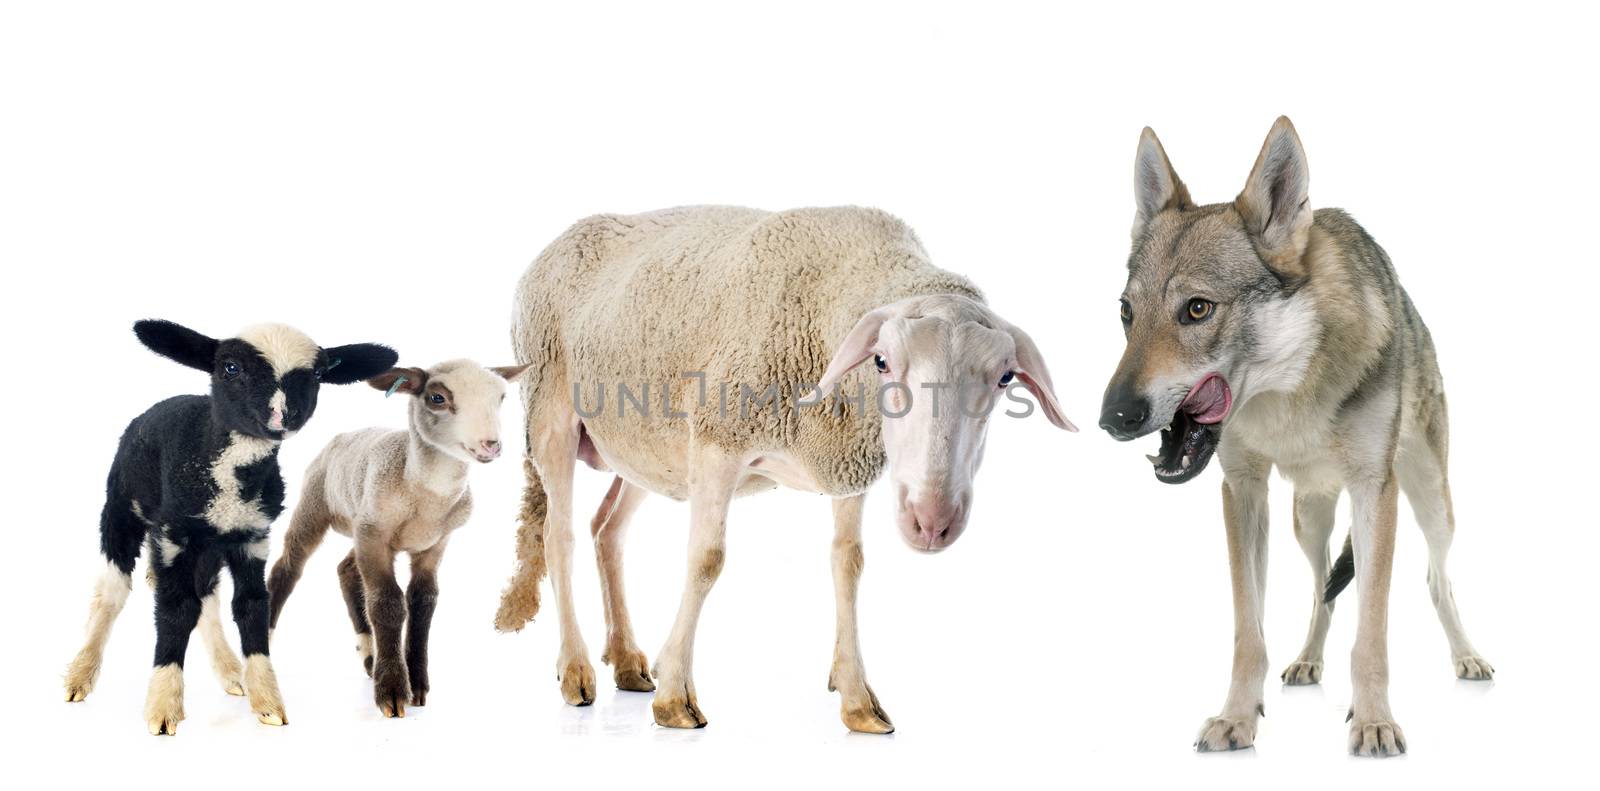 adult ewe, lambs and wolf in front of white background